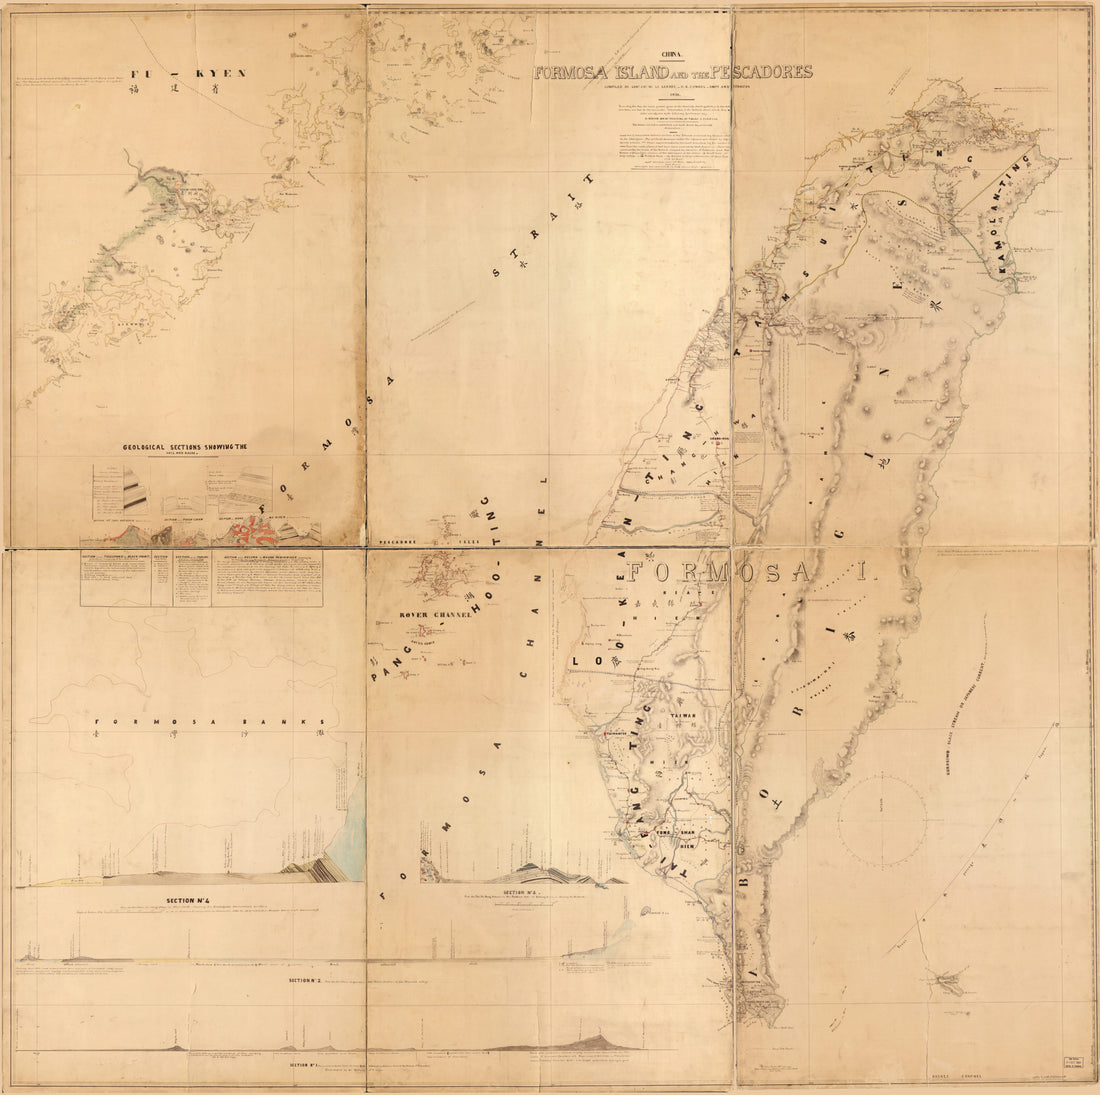 This old map of Formosa Island and the Pescadores from 1870 was created by Charles W. Legendre in 1870